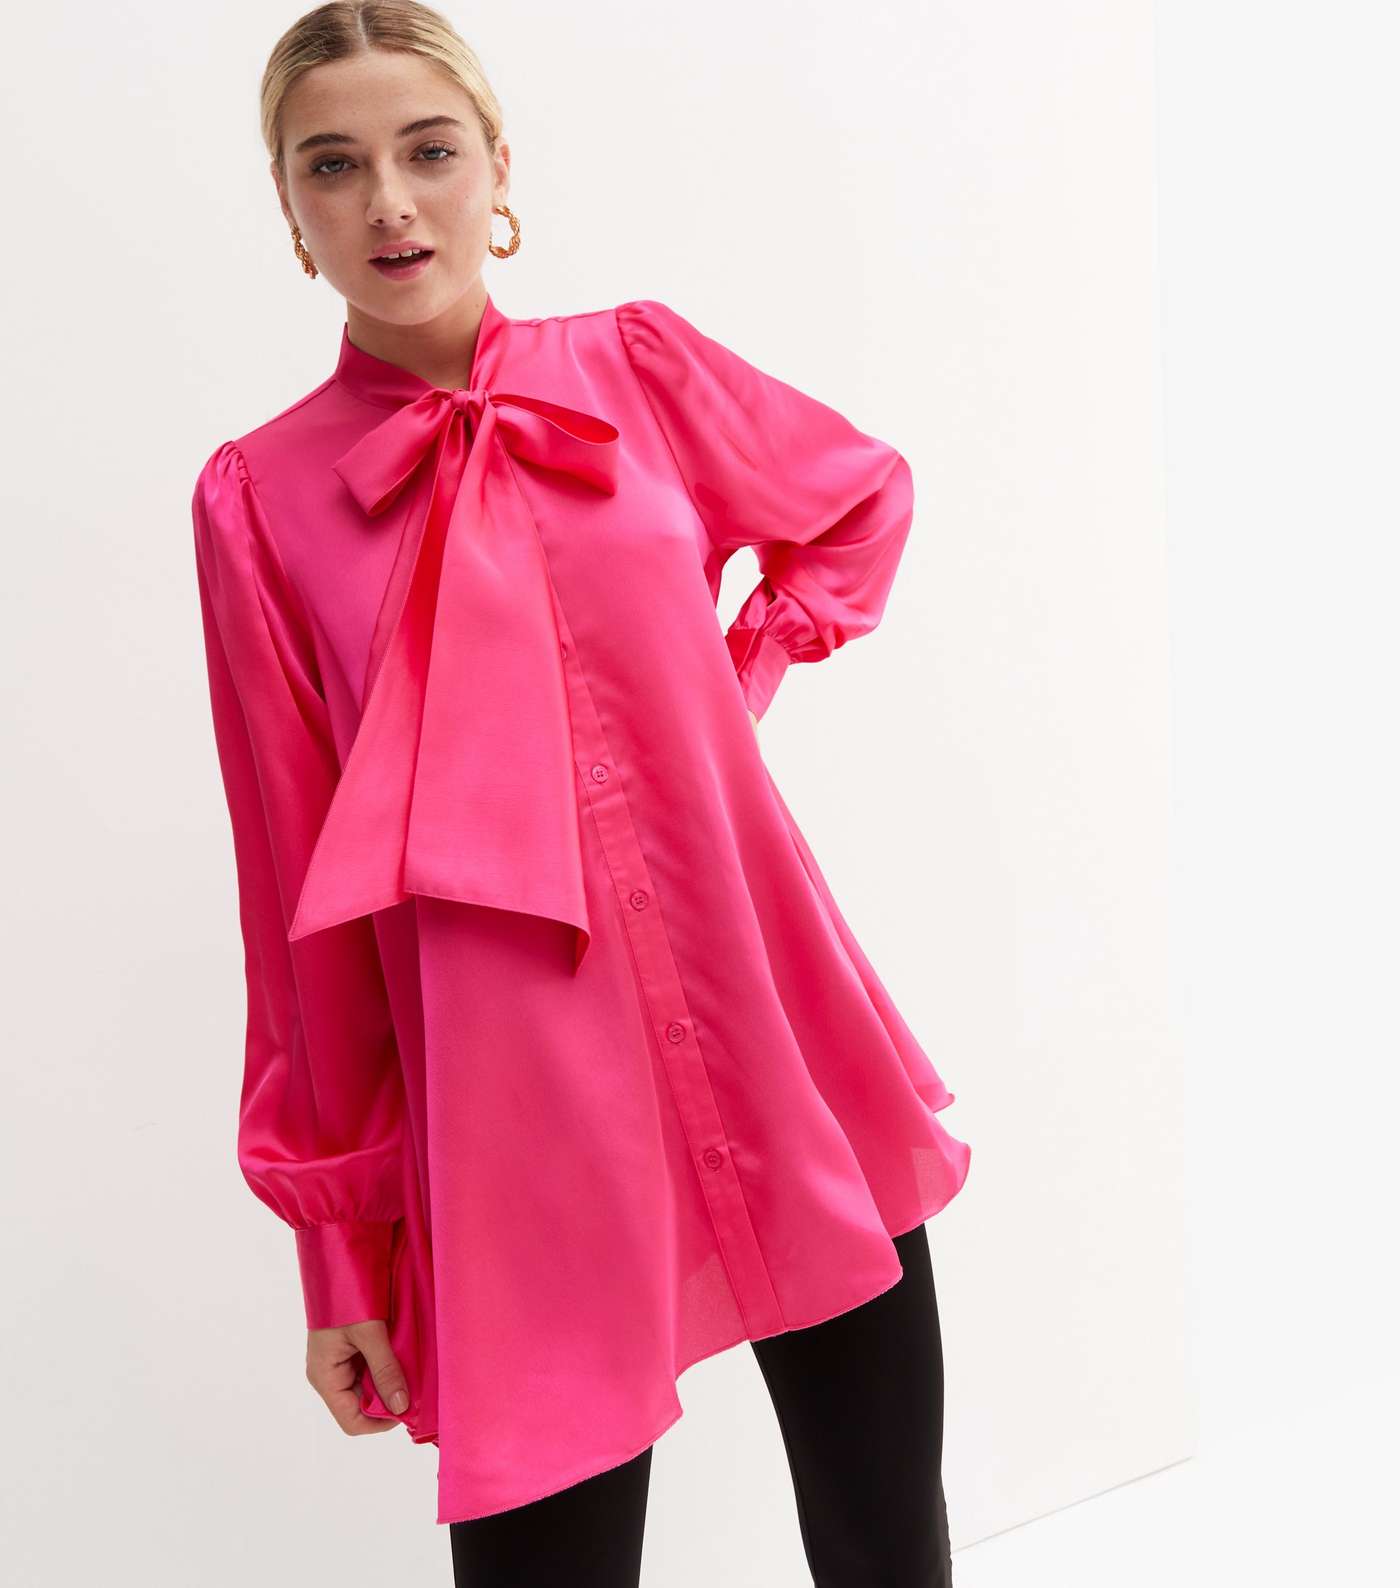 Bright Pink Satin Bow High Neck Long Sleeve Blouse Image 2